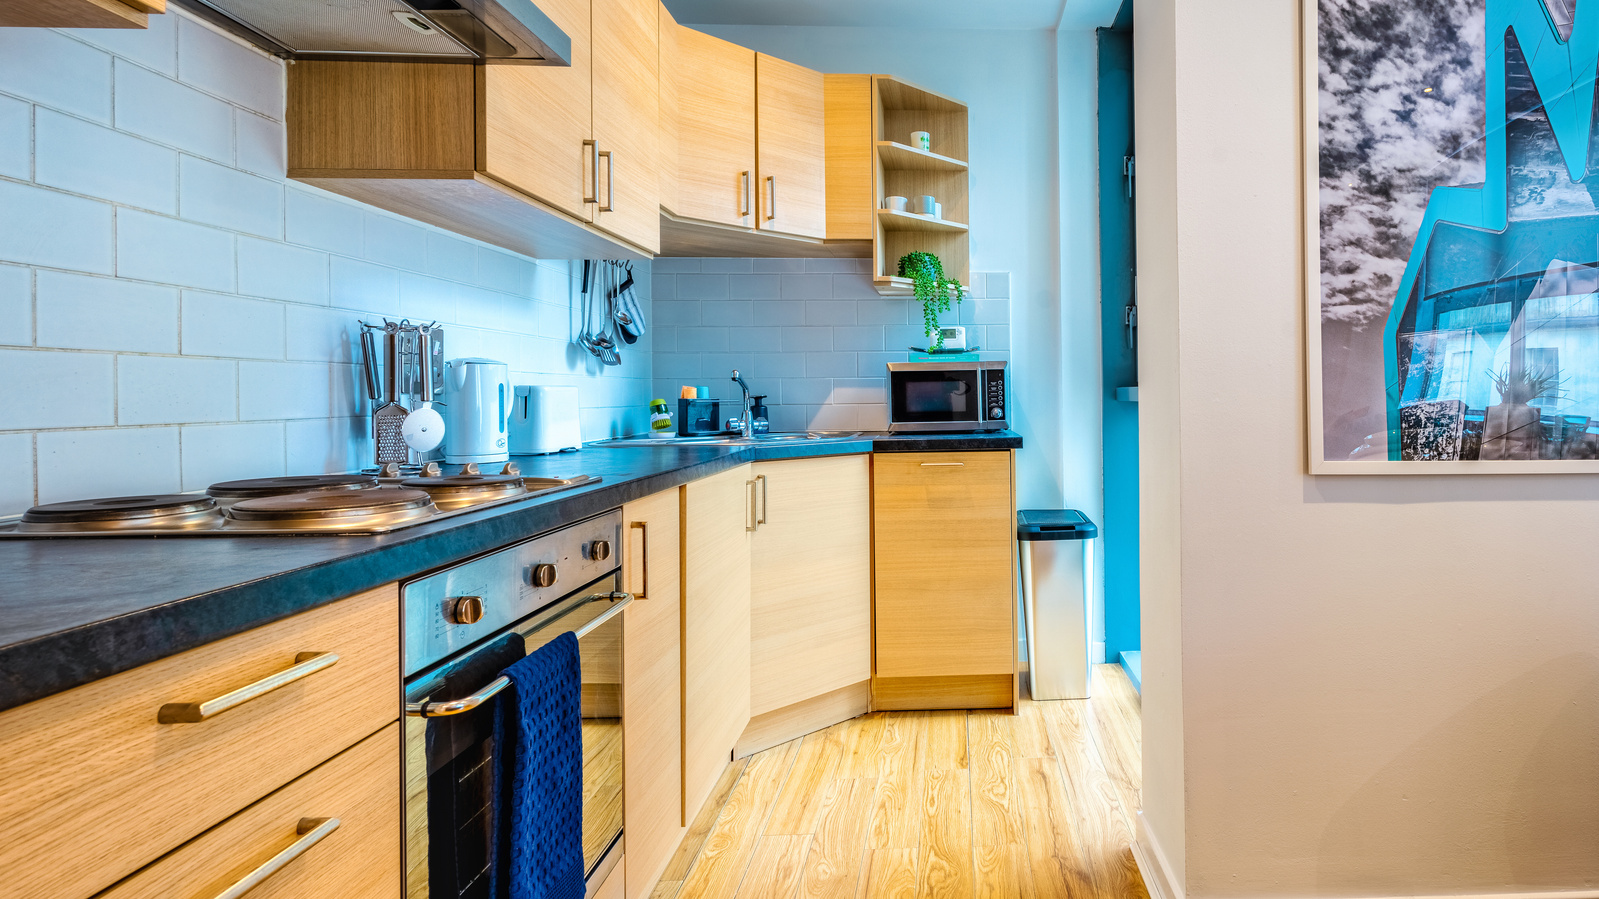 Kitchen for Scotland Interior Property in Glasgow - Photography by Nate Cleary